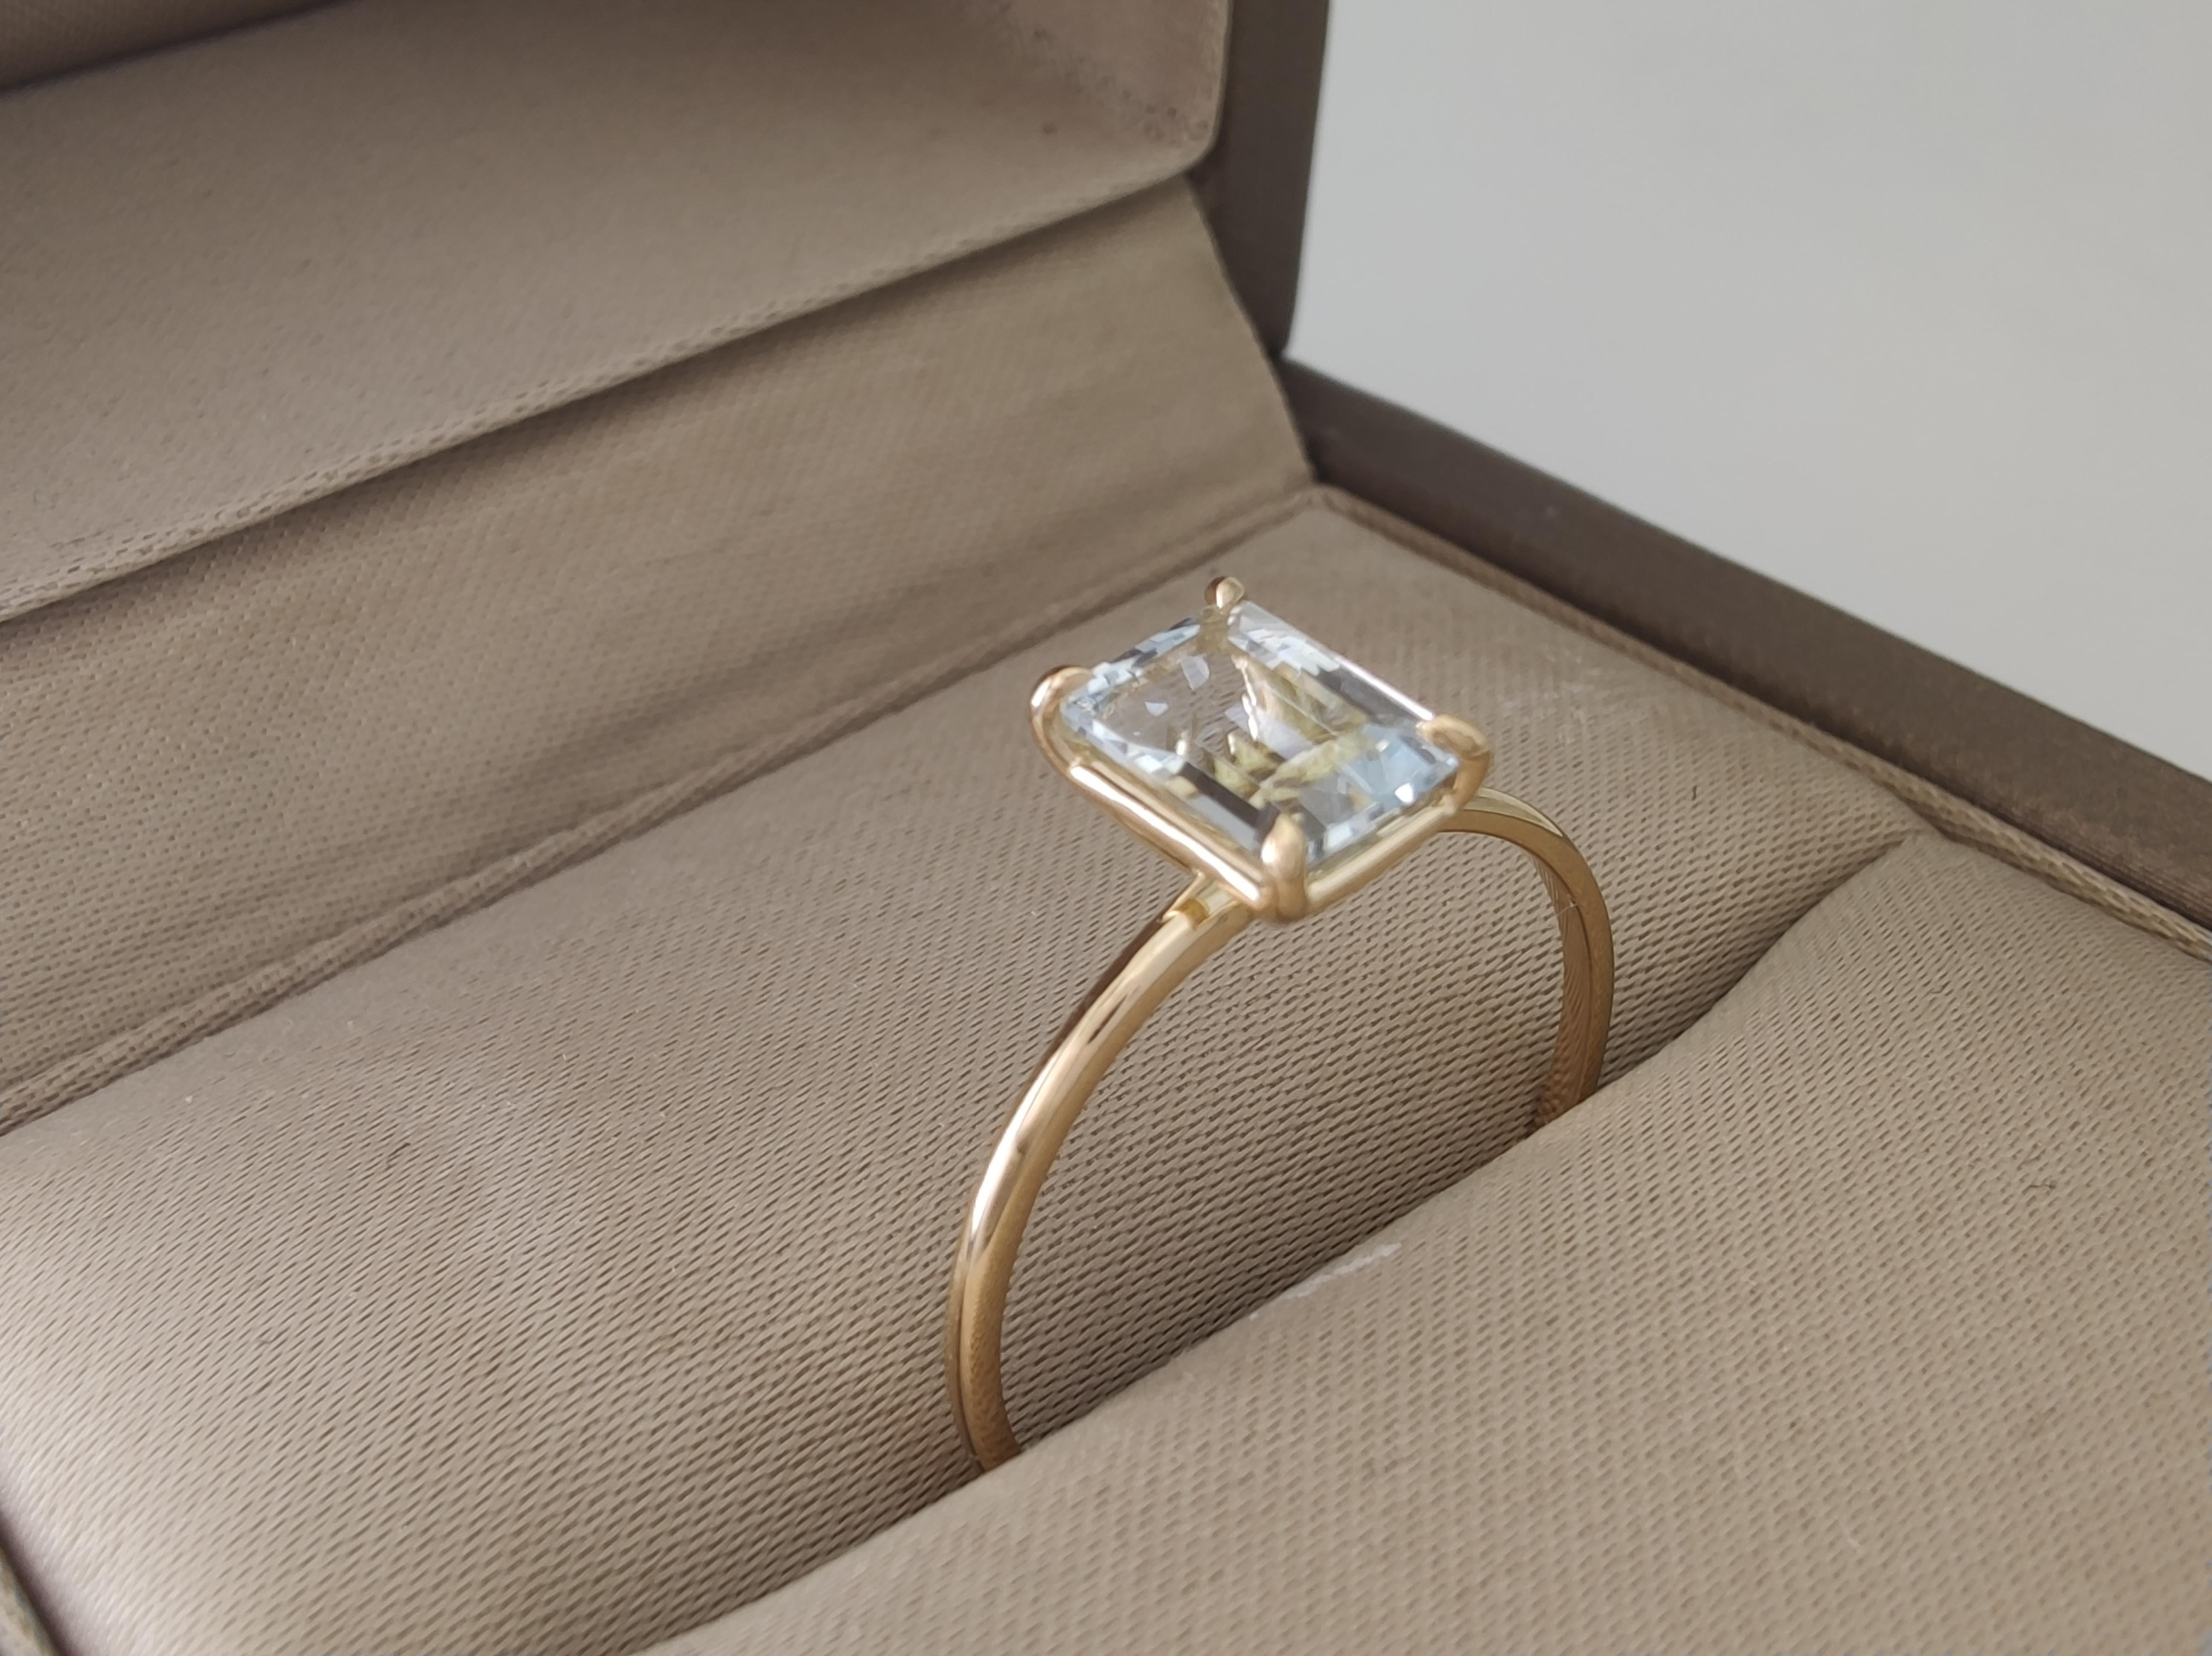 Emerald Cut Captivating 18K Gold Solitaire Ring featuring a 0.83 Ct. Emerald-Cut Aquamarine For Sale